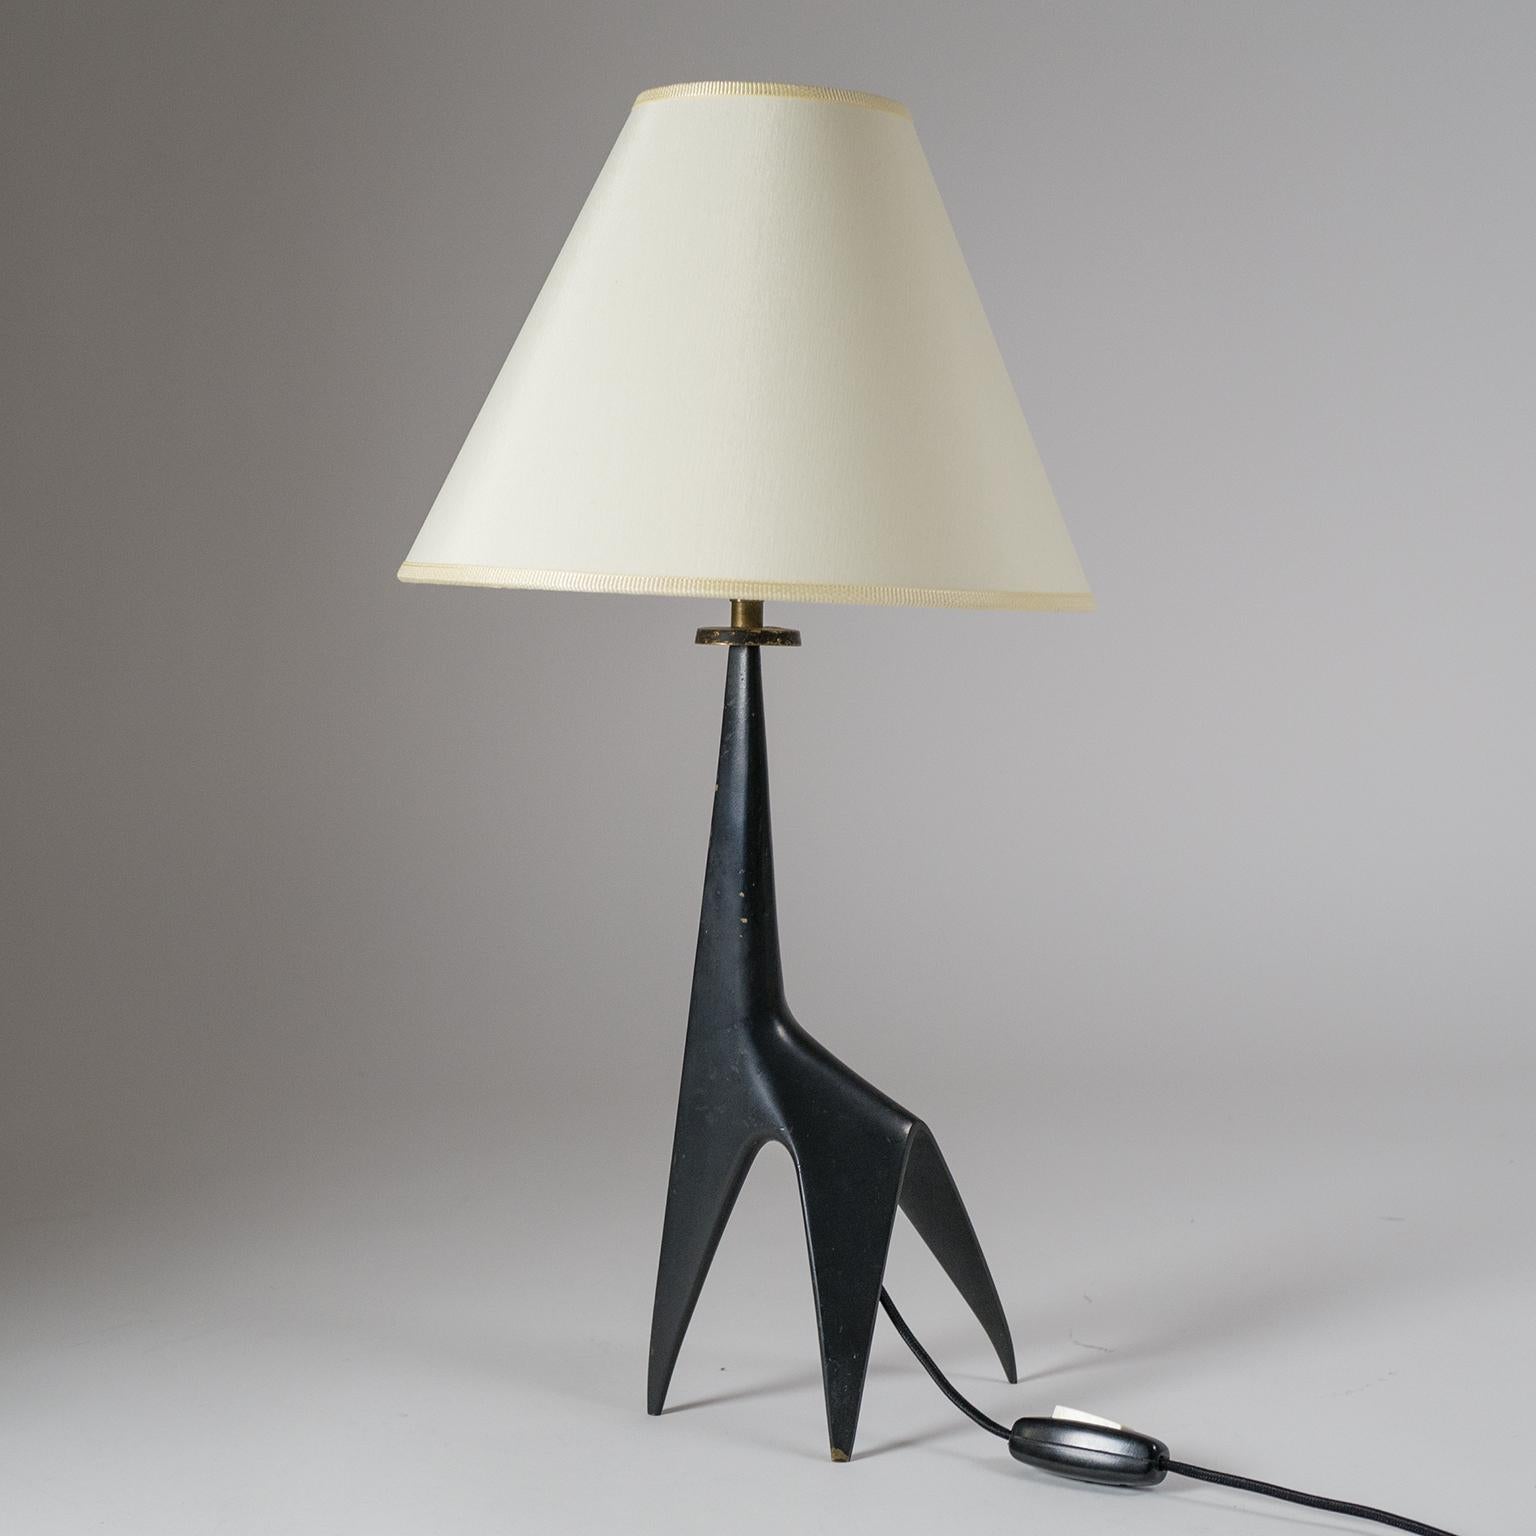 Superb minimalist French 'Giraffe' table lamp from the 1950s. The black lacquered cast bronze base is a sensuously curved fusion of a tripod with a giraffe silhouette, and one of the finest examples of mid century French 'zoomorphic' tradition. Some